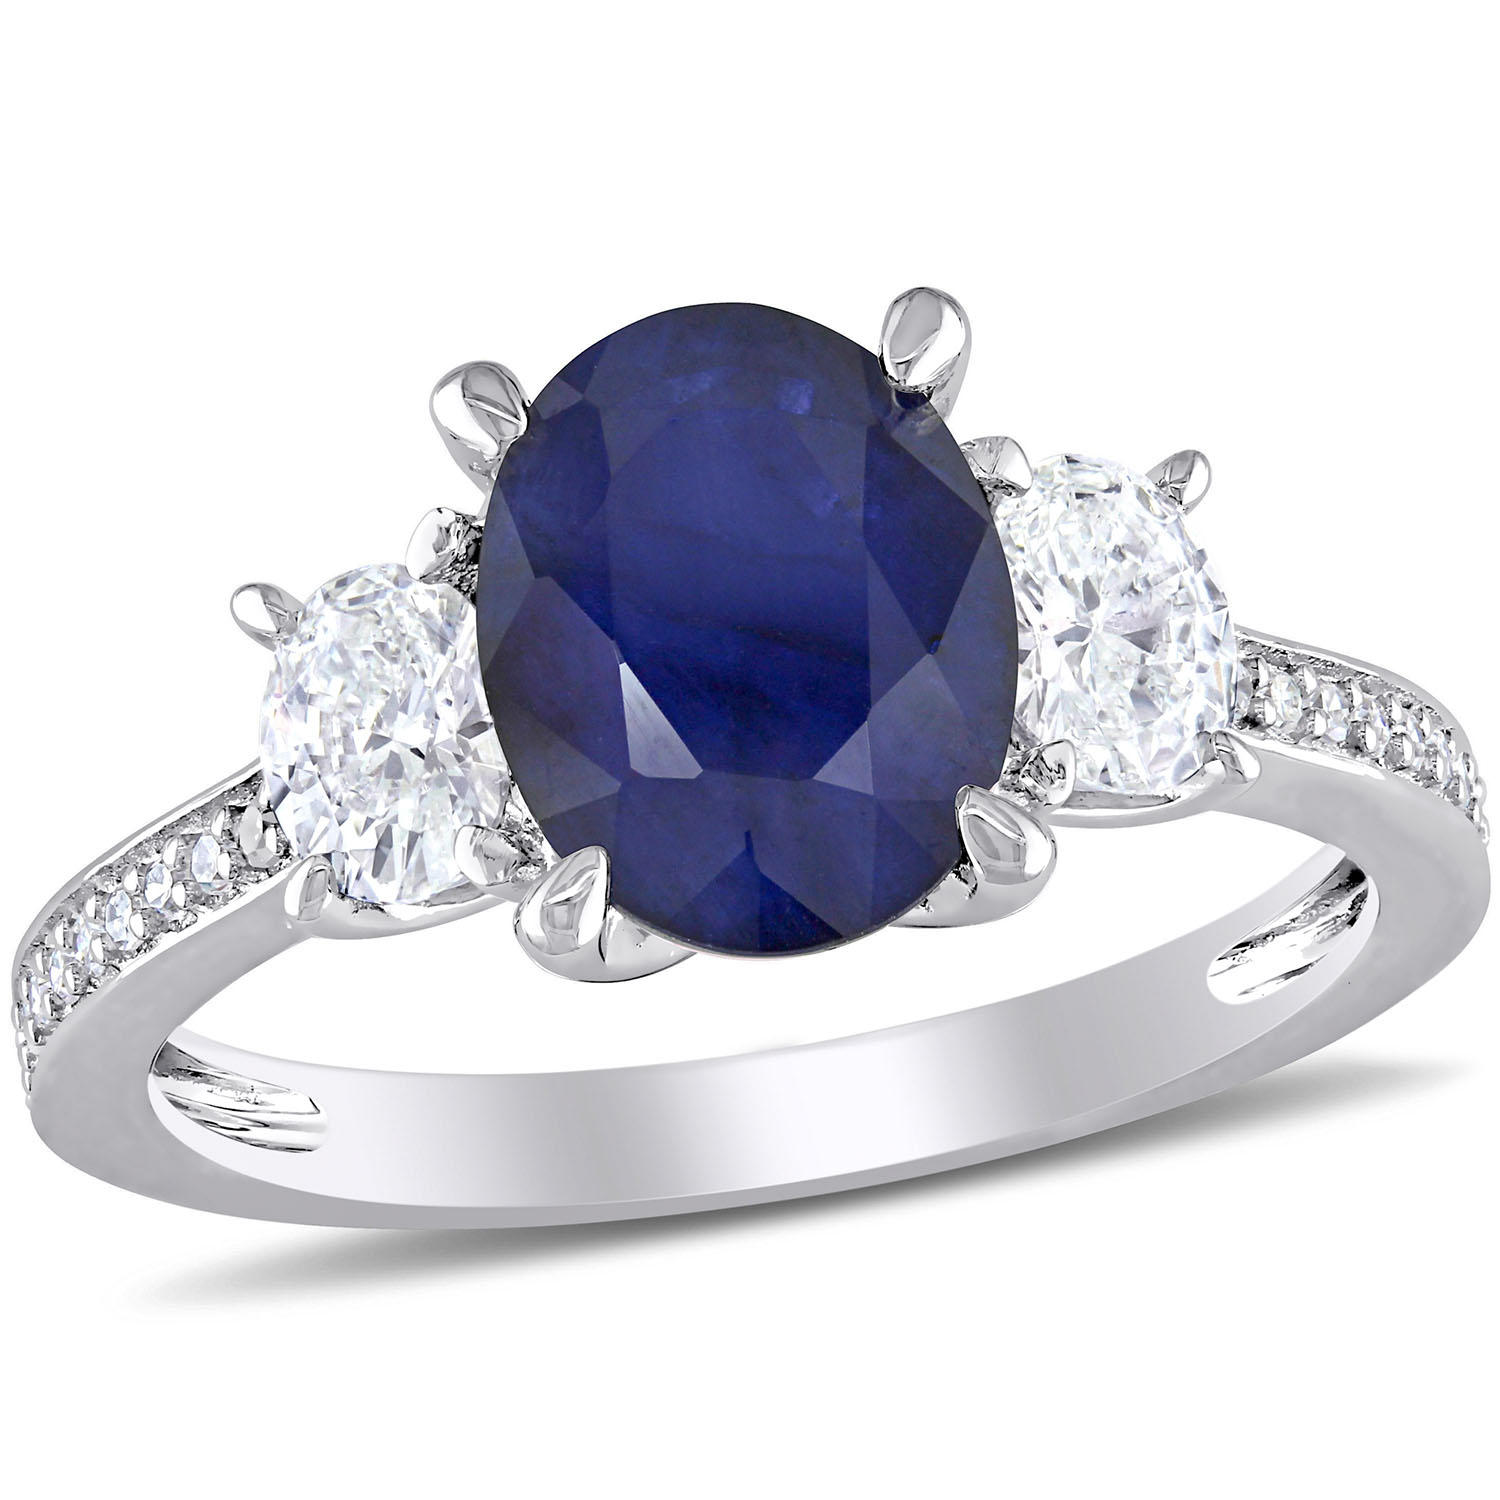 2.6 CT. T.G.W. Sapphire and 0.6 CT. T.W. Diamond Three-Stone Engagement Ring in 14k White Gold 7